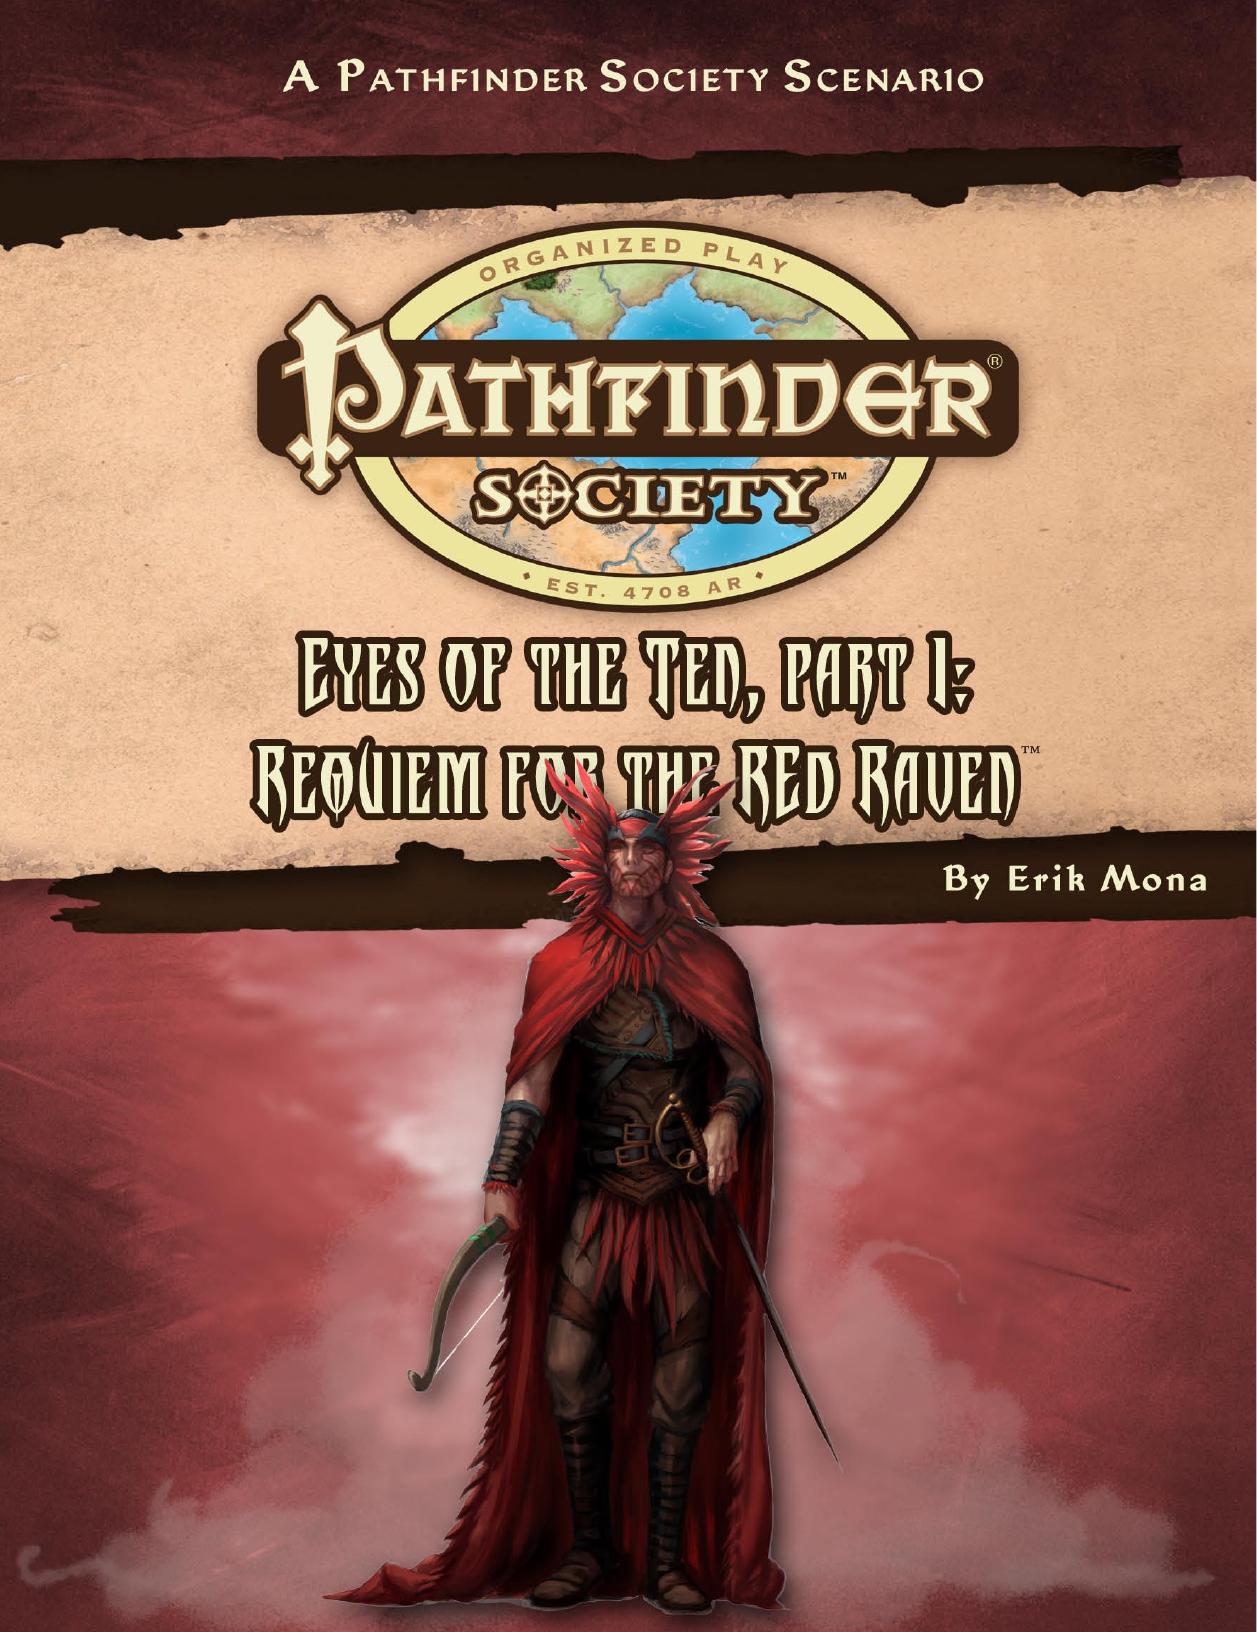 Pathfinder Society: Eyes of the Ten I: Requiem for the Red Raven